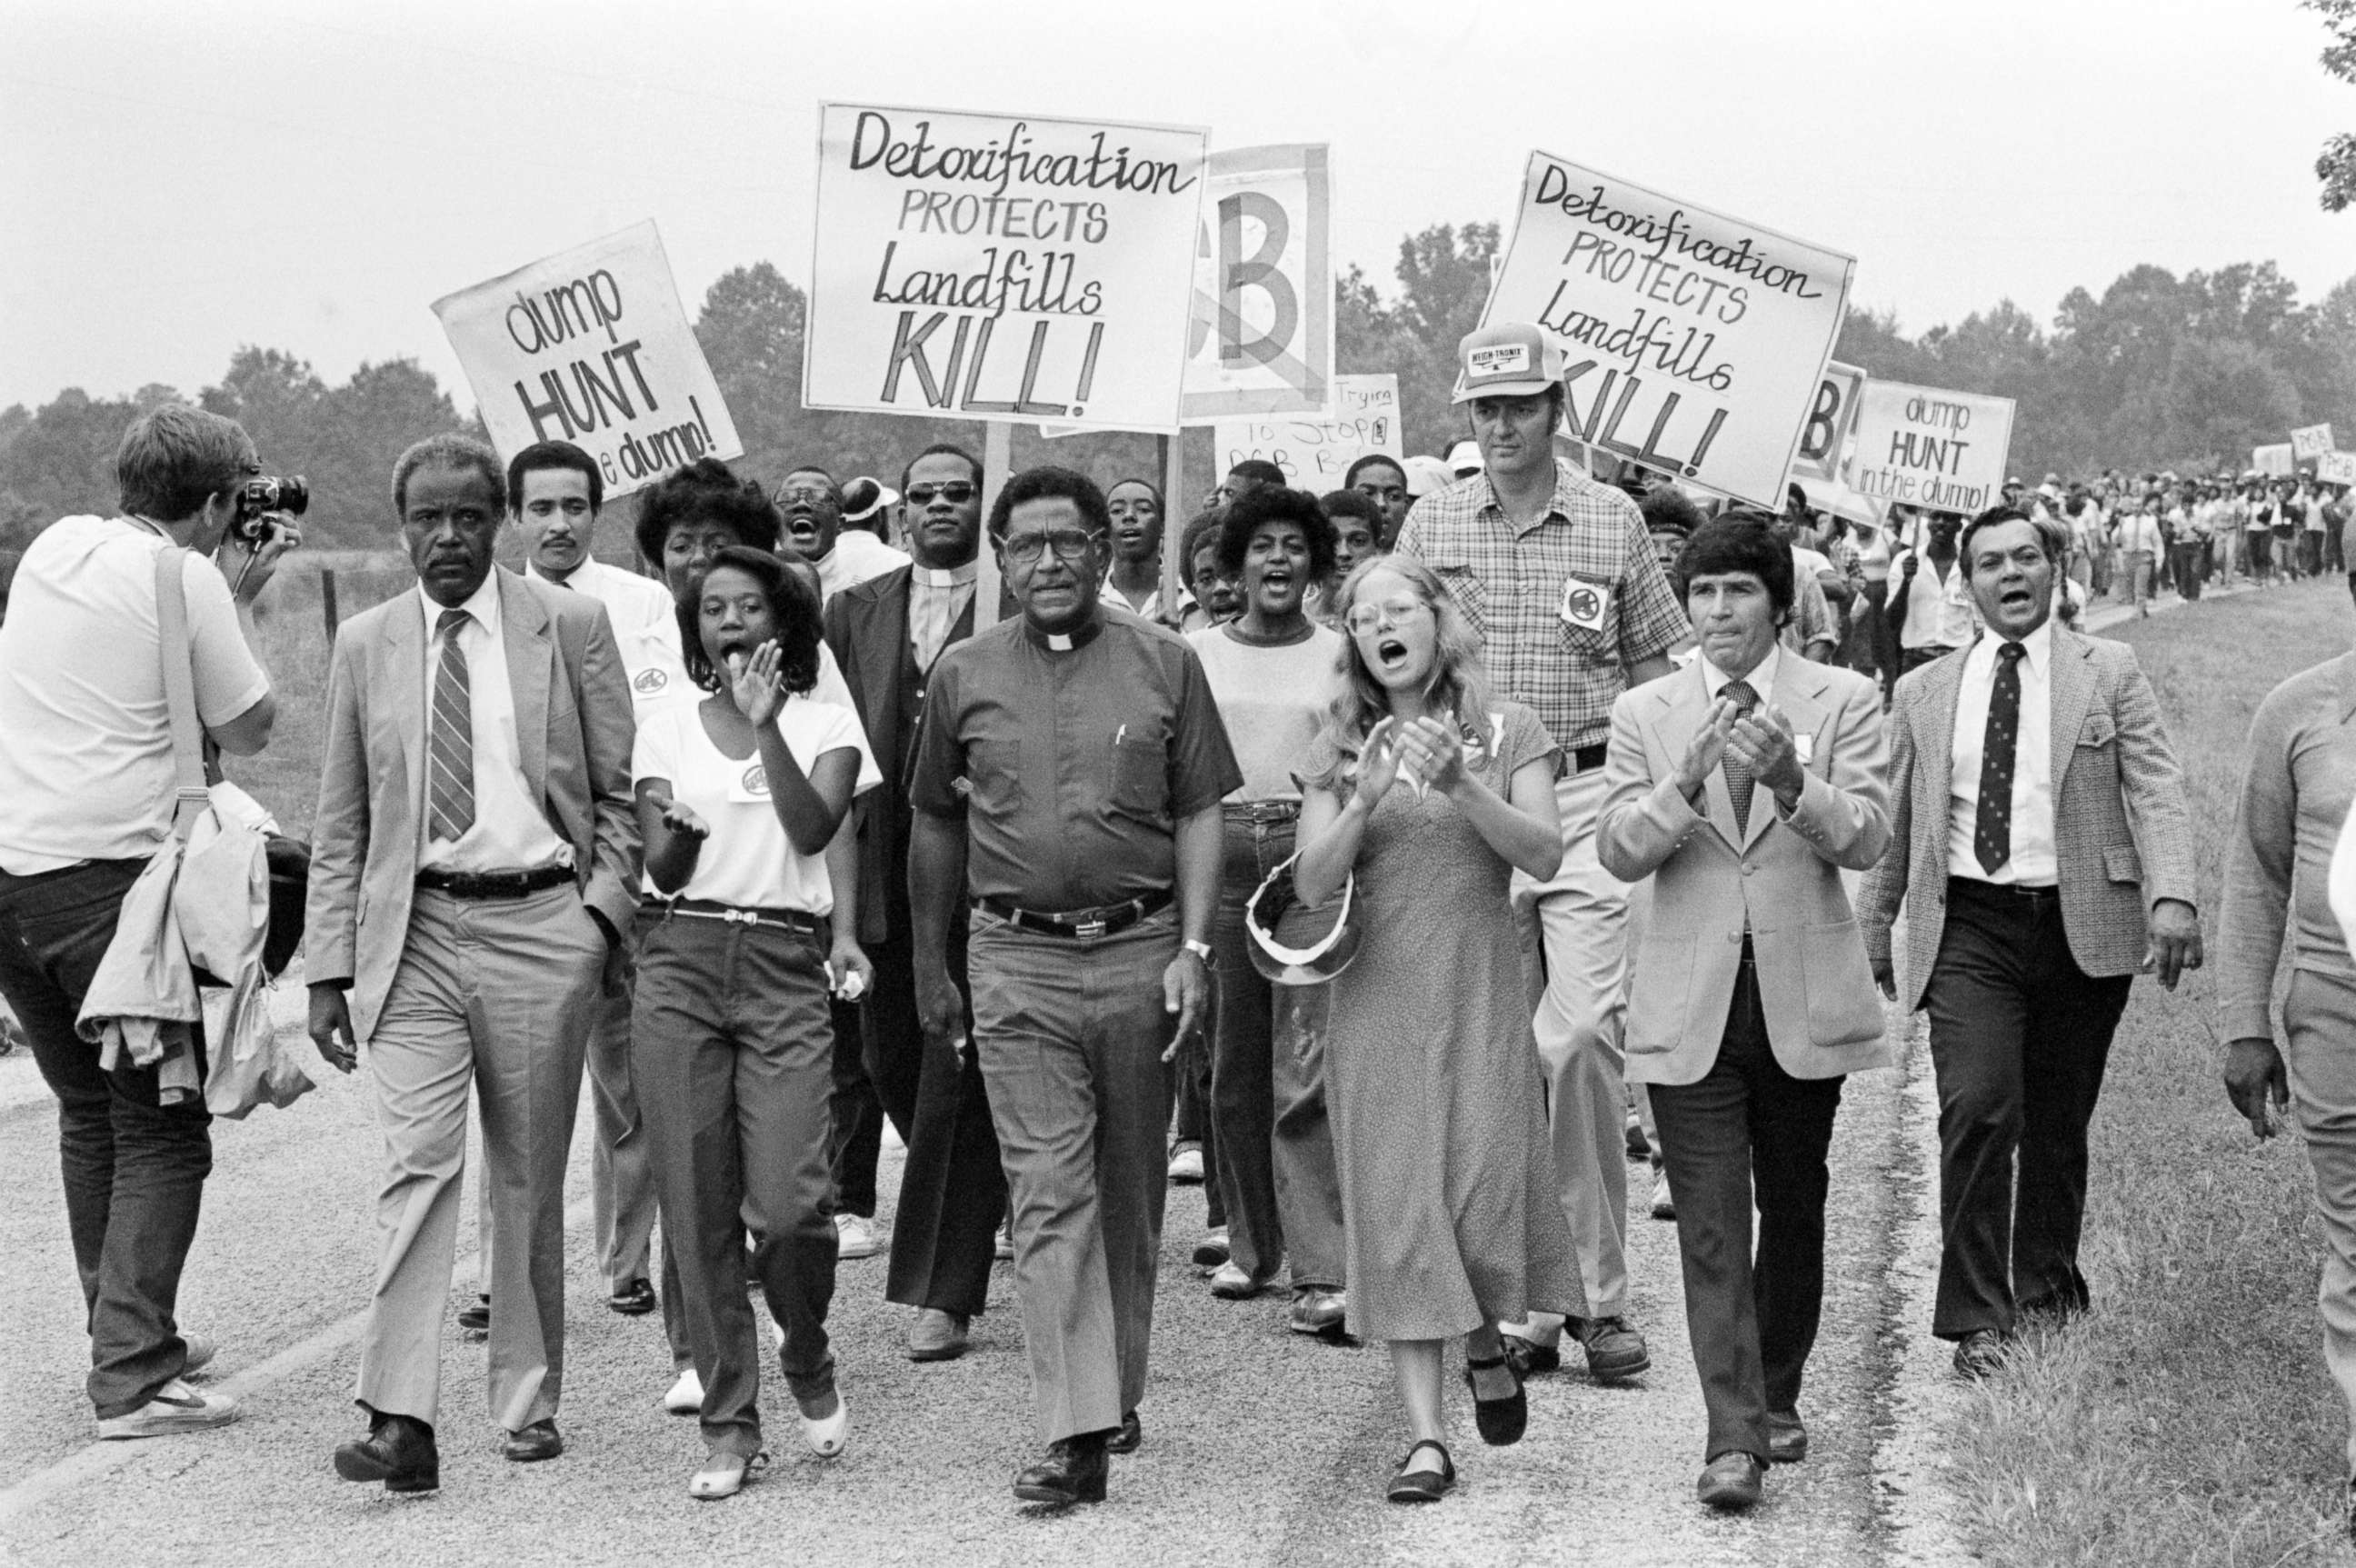 PHOTO: Rev. Joseph Lowery, head of the Southern Christian Leadership Conference, leads a protest march against a toxic waste dump opened in a predominantly Black and poor community in Afton, N.C., Oct. 21, 1982.